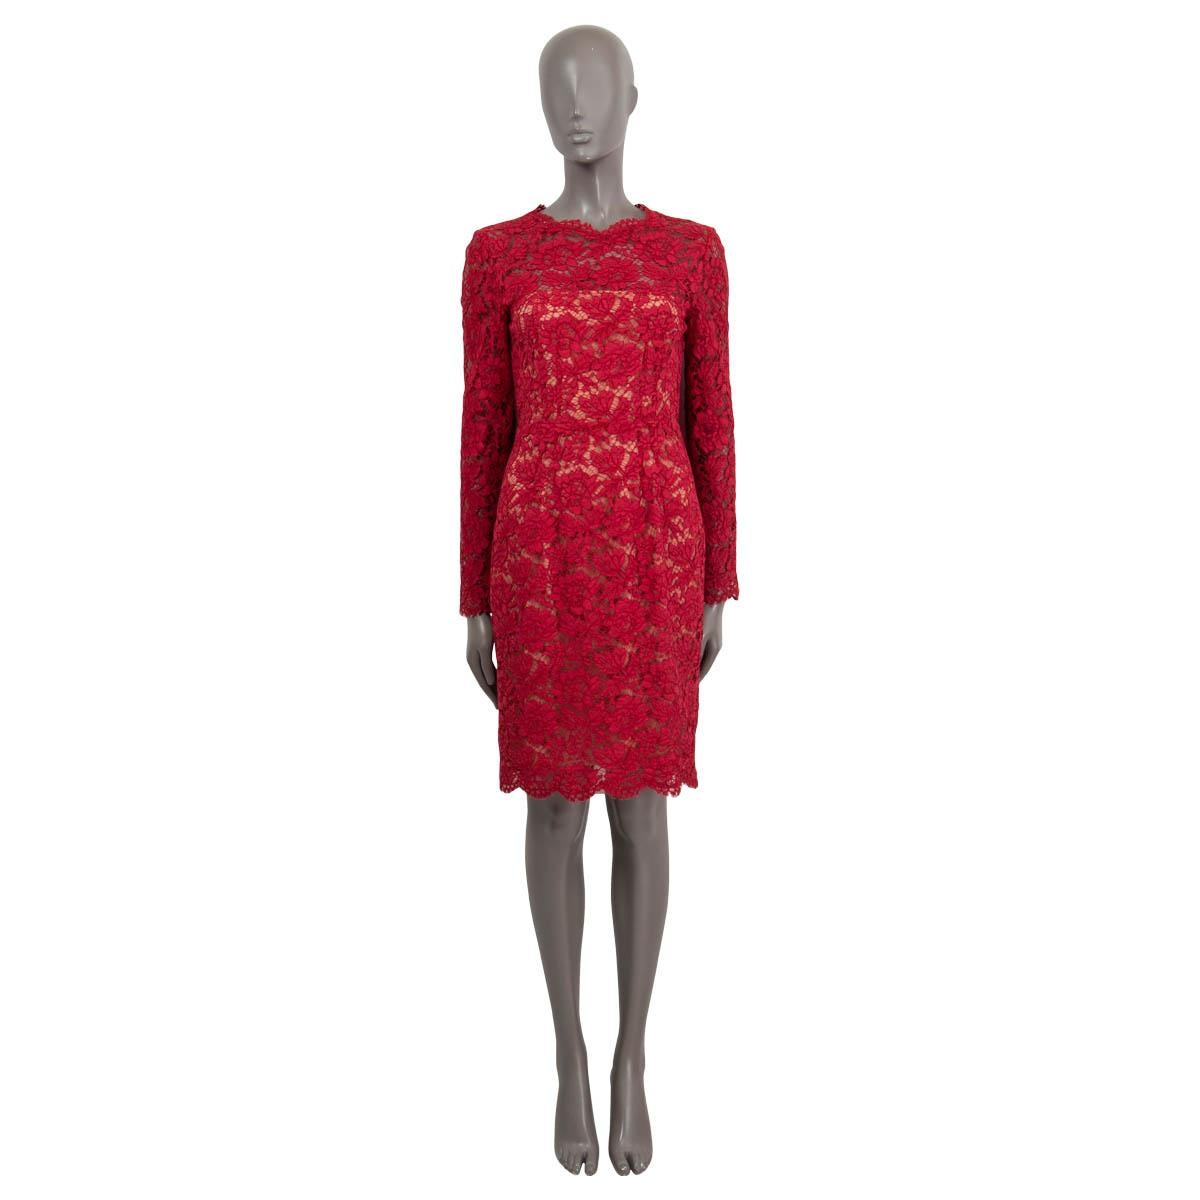 100% authentic Valentino floral giupure lace dress in red cotton (77%), viscose (17%) and nylon (6%). Features long sleeves, scalloped edges and bows in the back. Closes with a zipper in the back. Partially lined in nylon (100%). Has been worn and